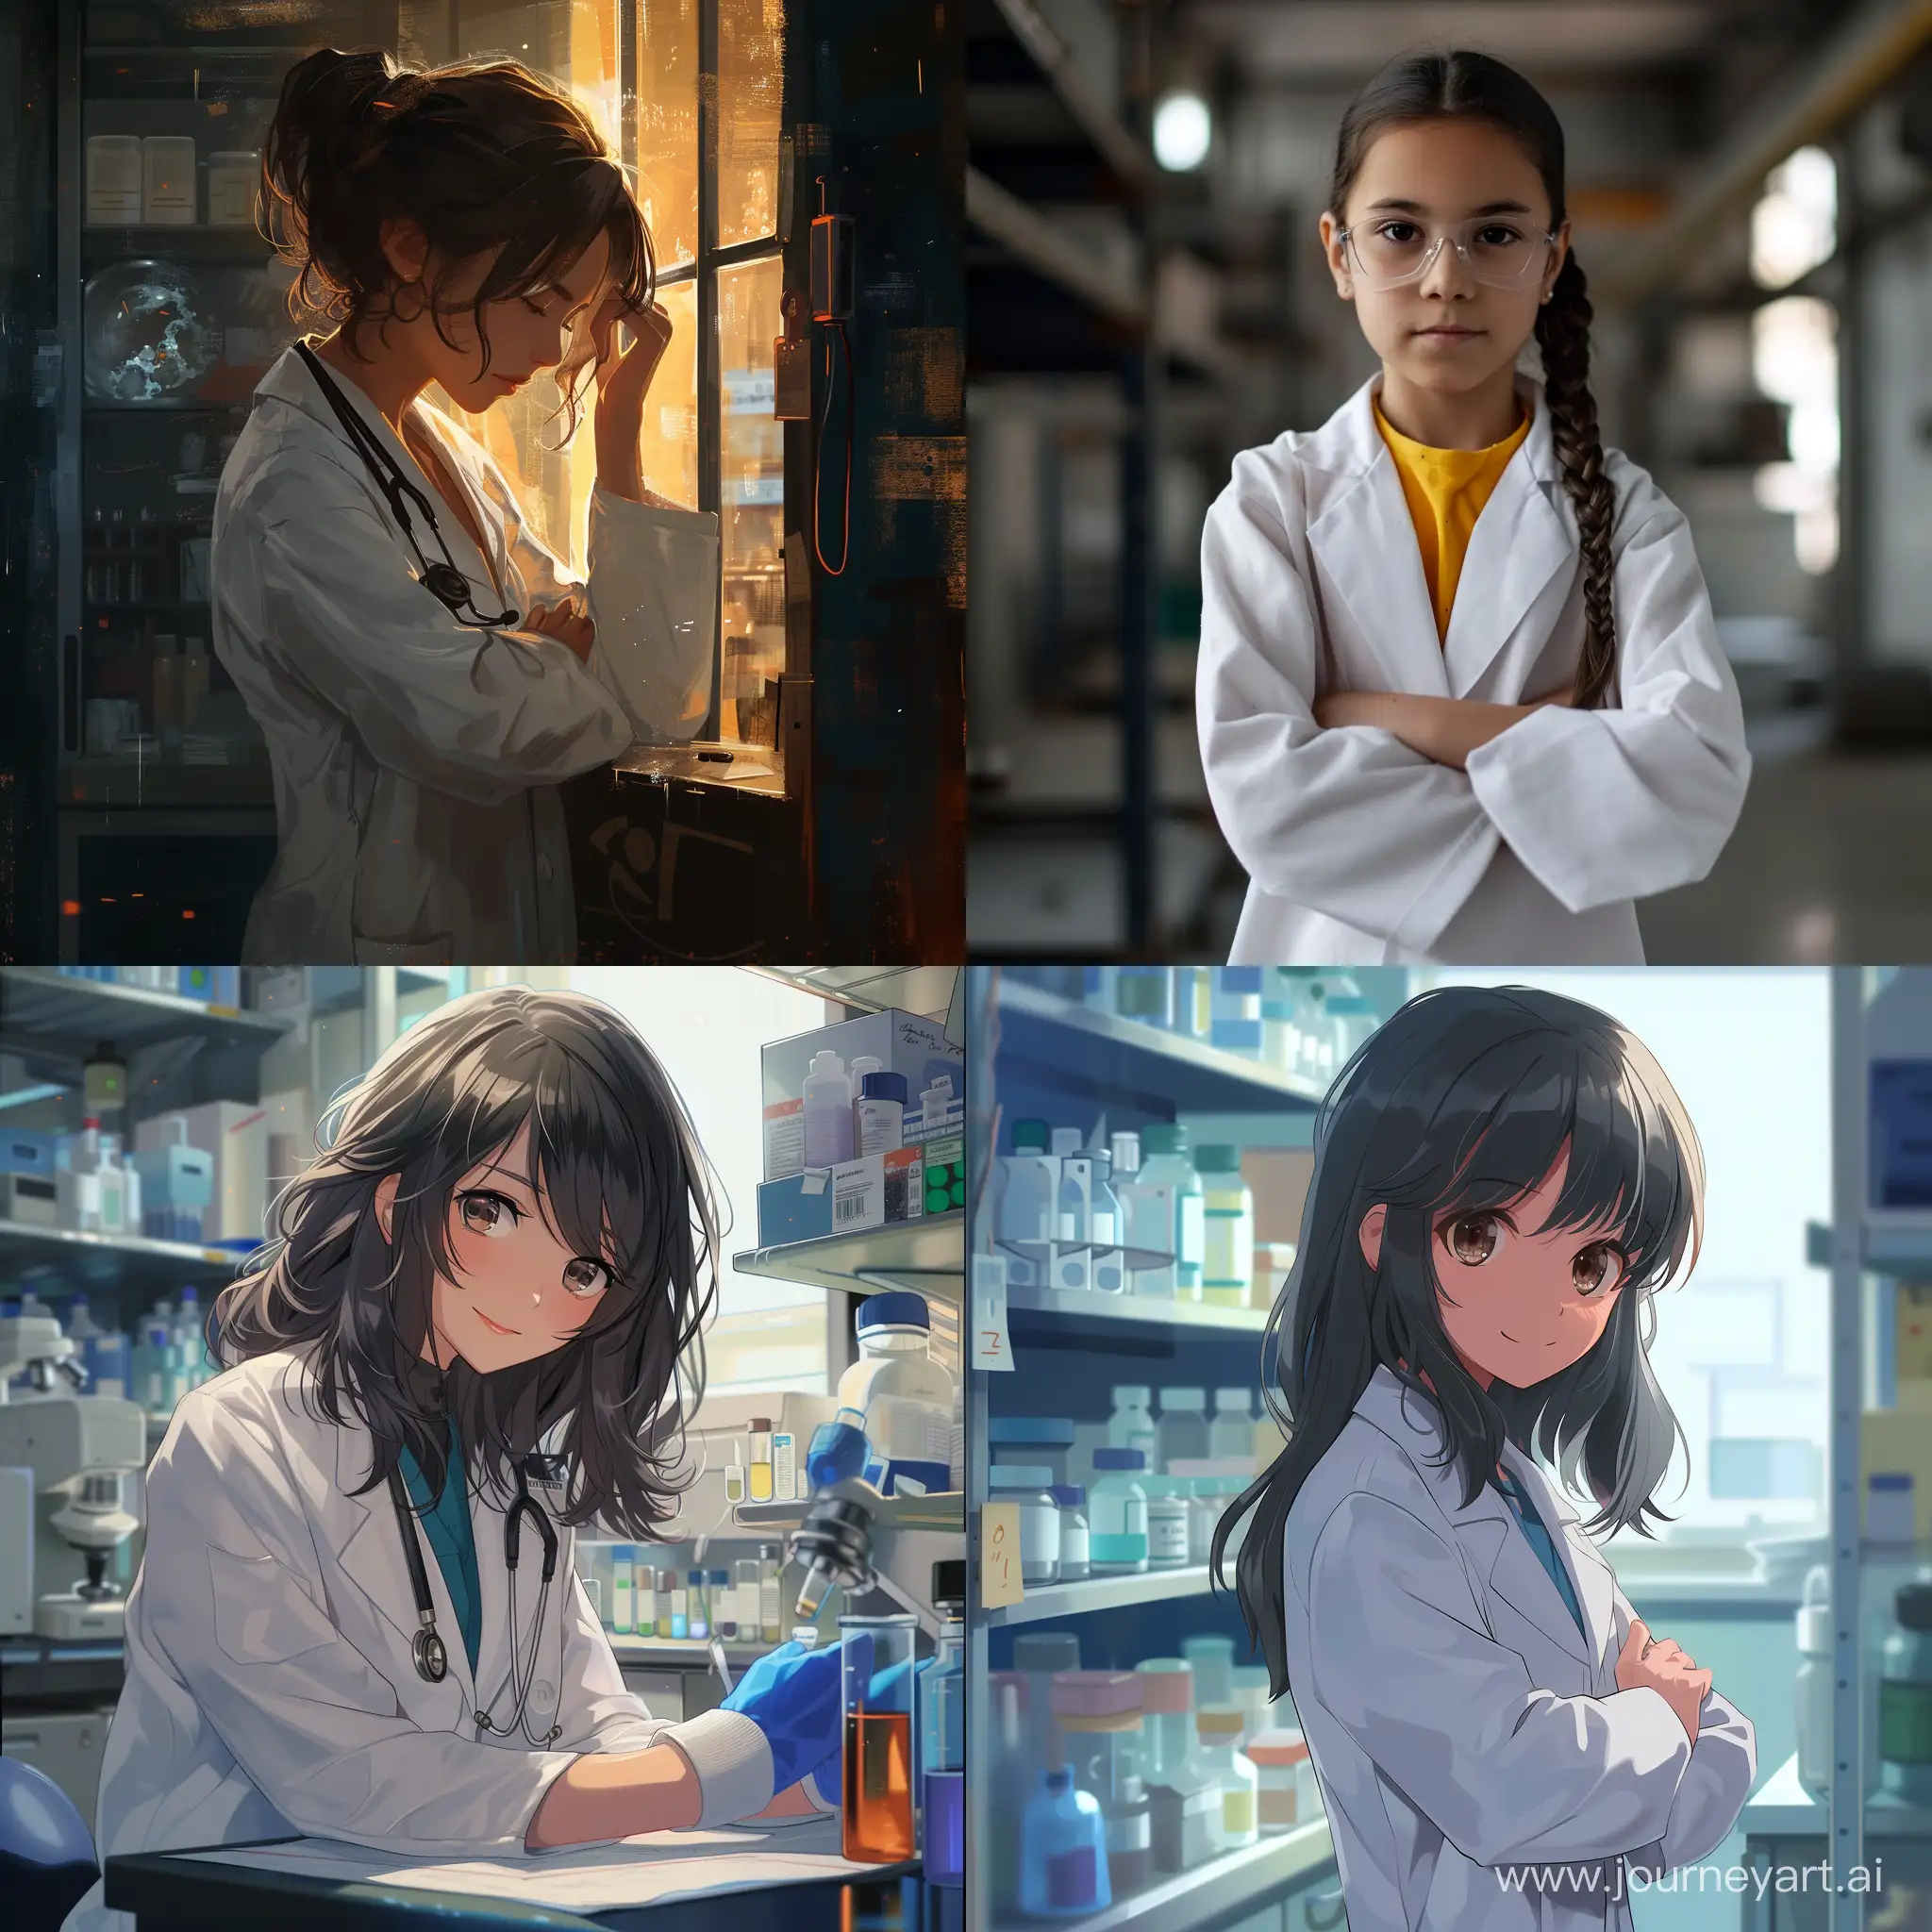 A girl in a lab coat